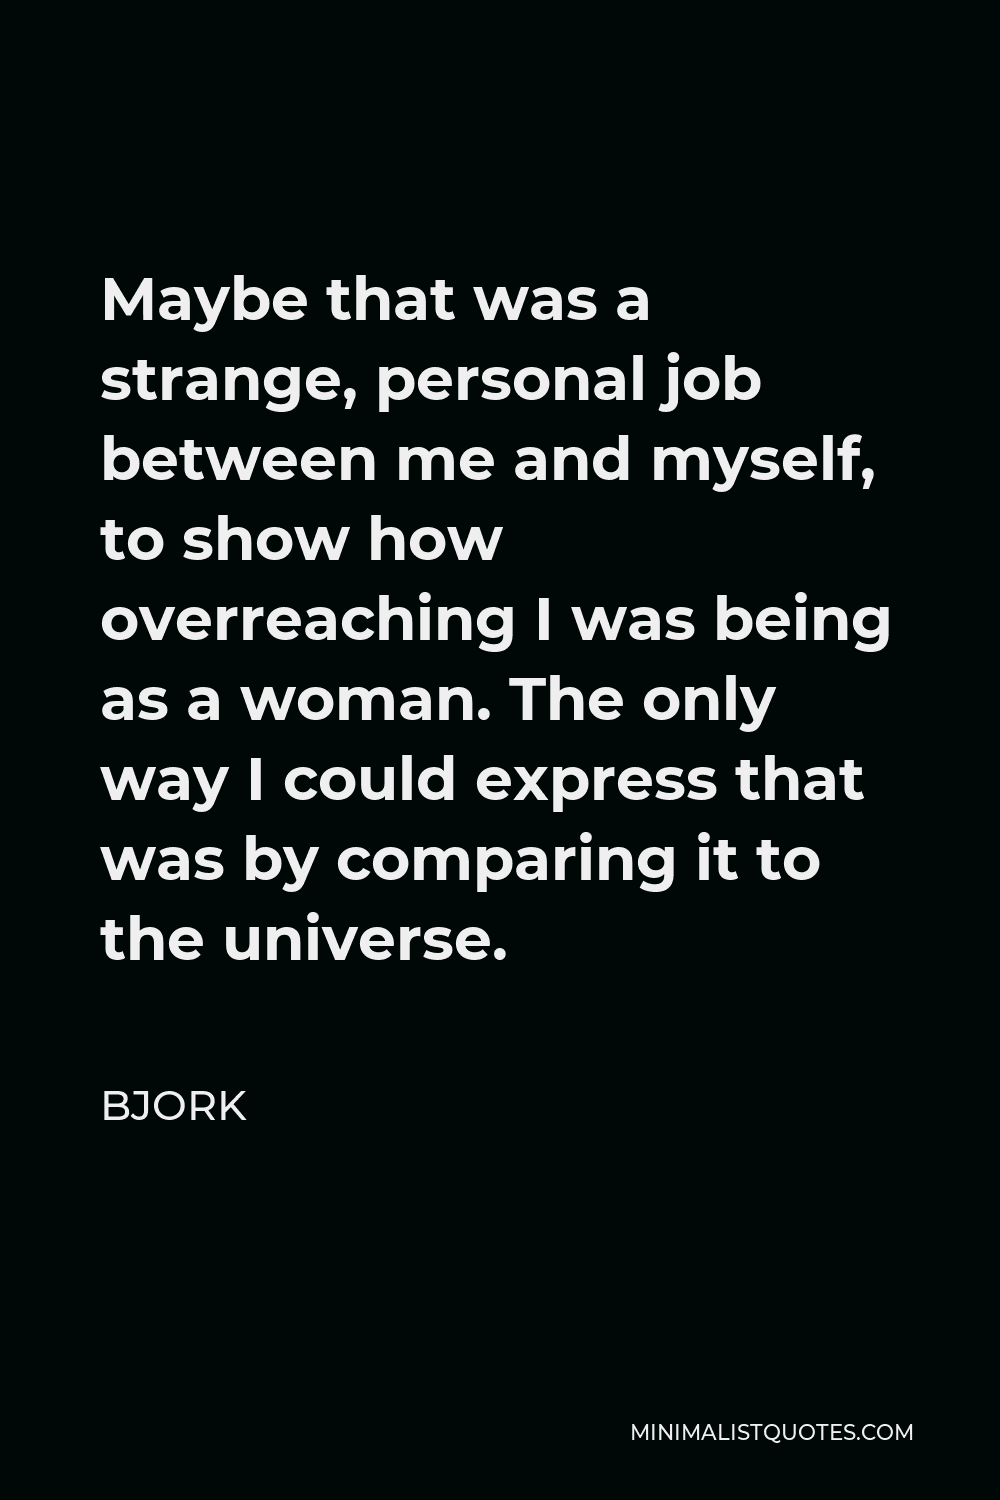 Bjork Quote - Maybe that was a strange, personal job between me and myself, to show how overreaching I was being as a woman. The only way I could express that was by comparing it to the universe.